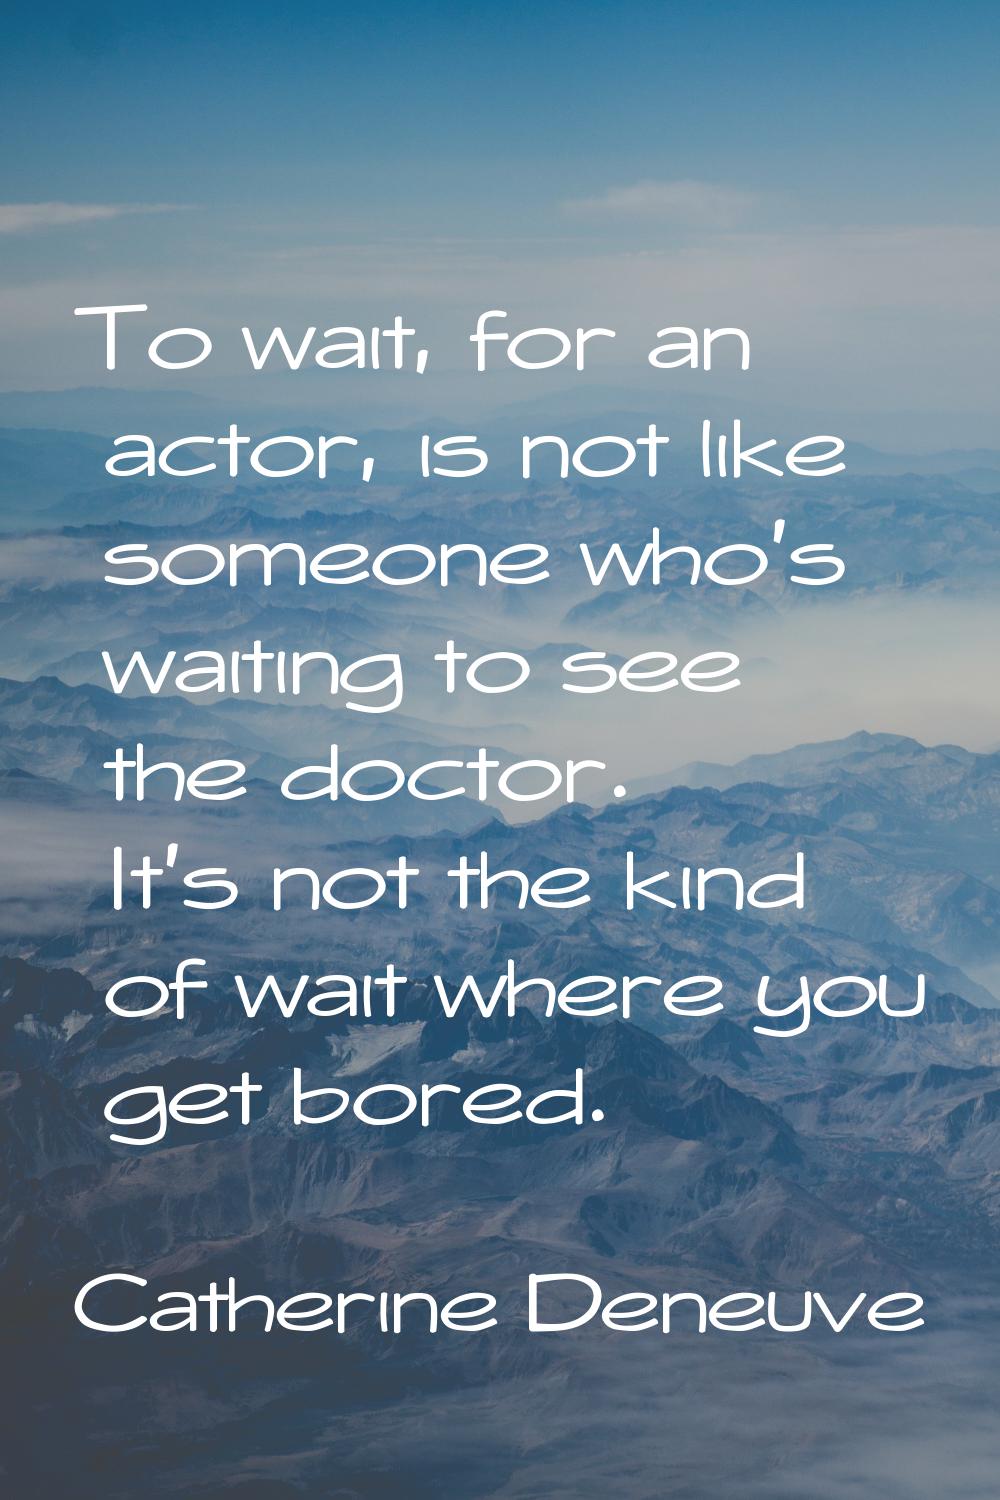 To wait, for an actor, is not like someone who's waiting to see the doctor. It's not the kind of wa